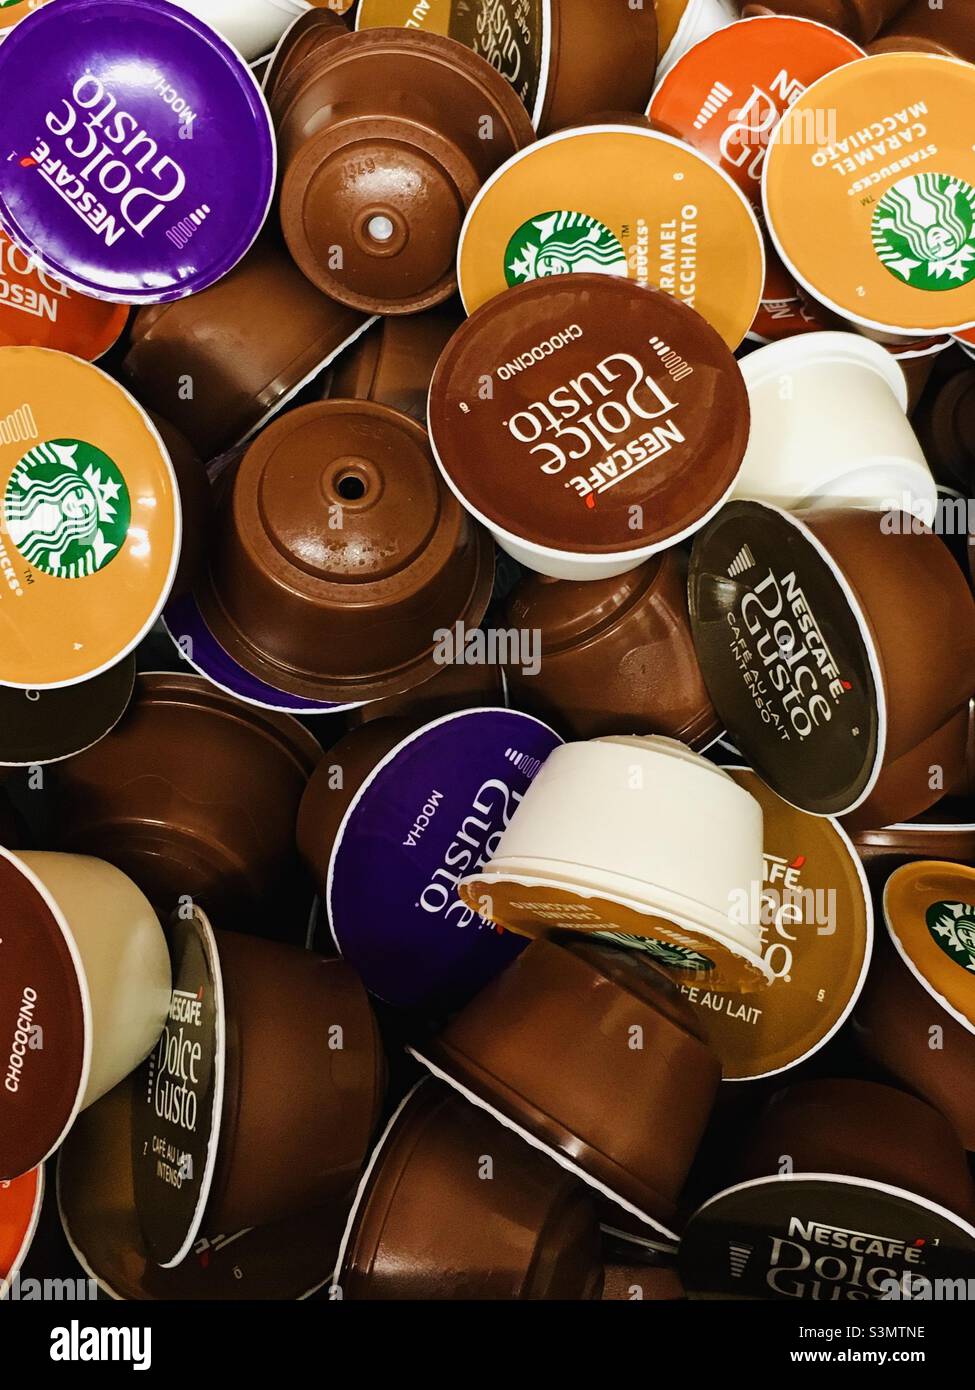 Selection of Dolce Gusto and Starbucks coffee pods Stock Photo